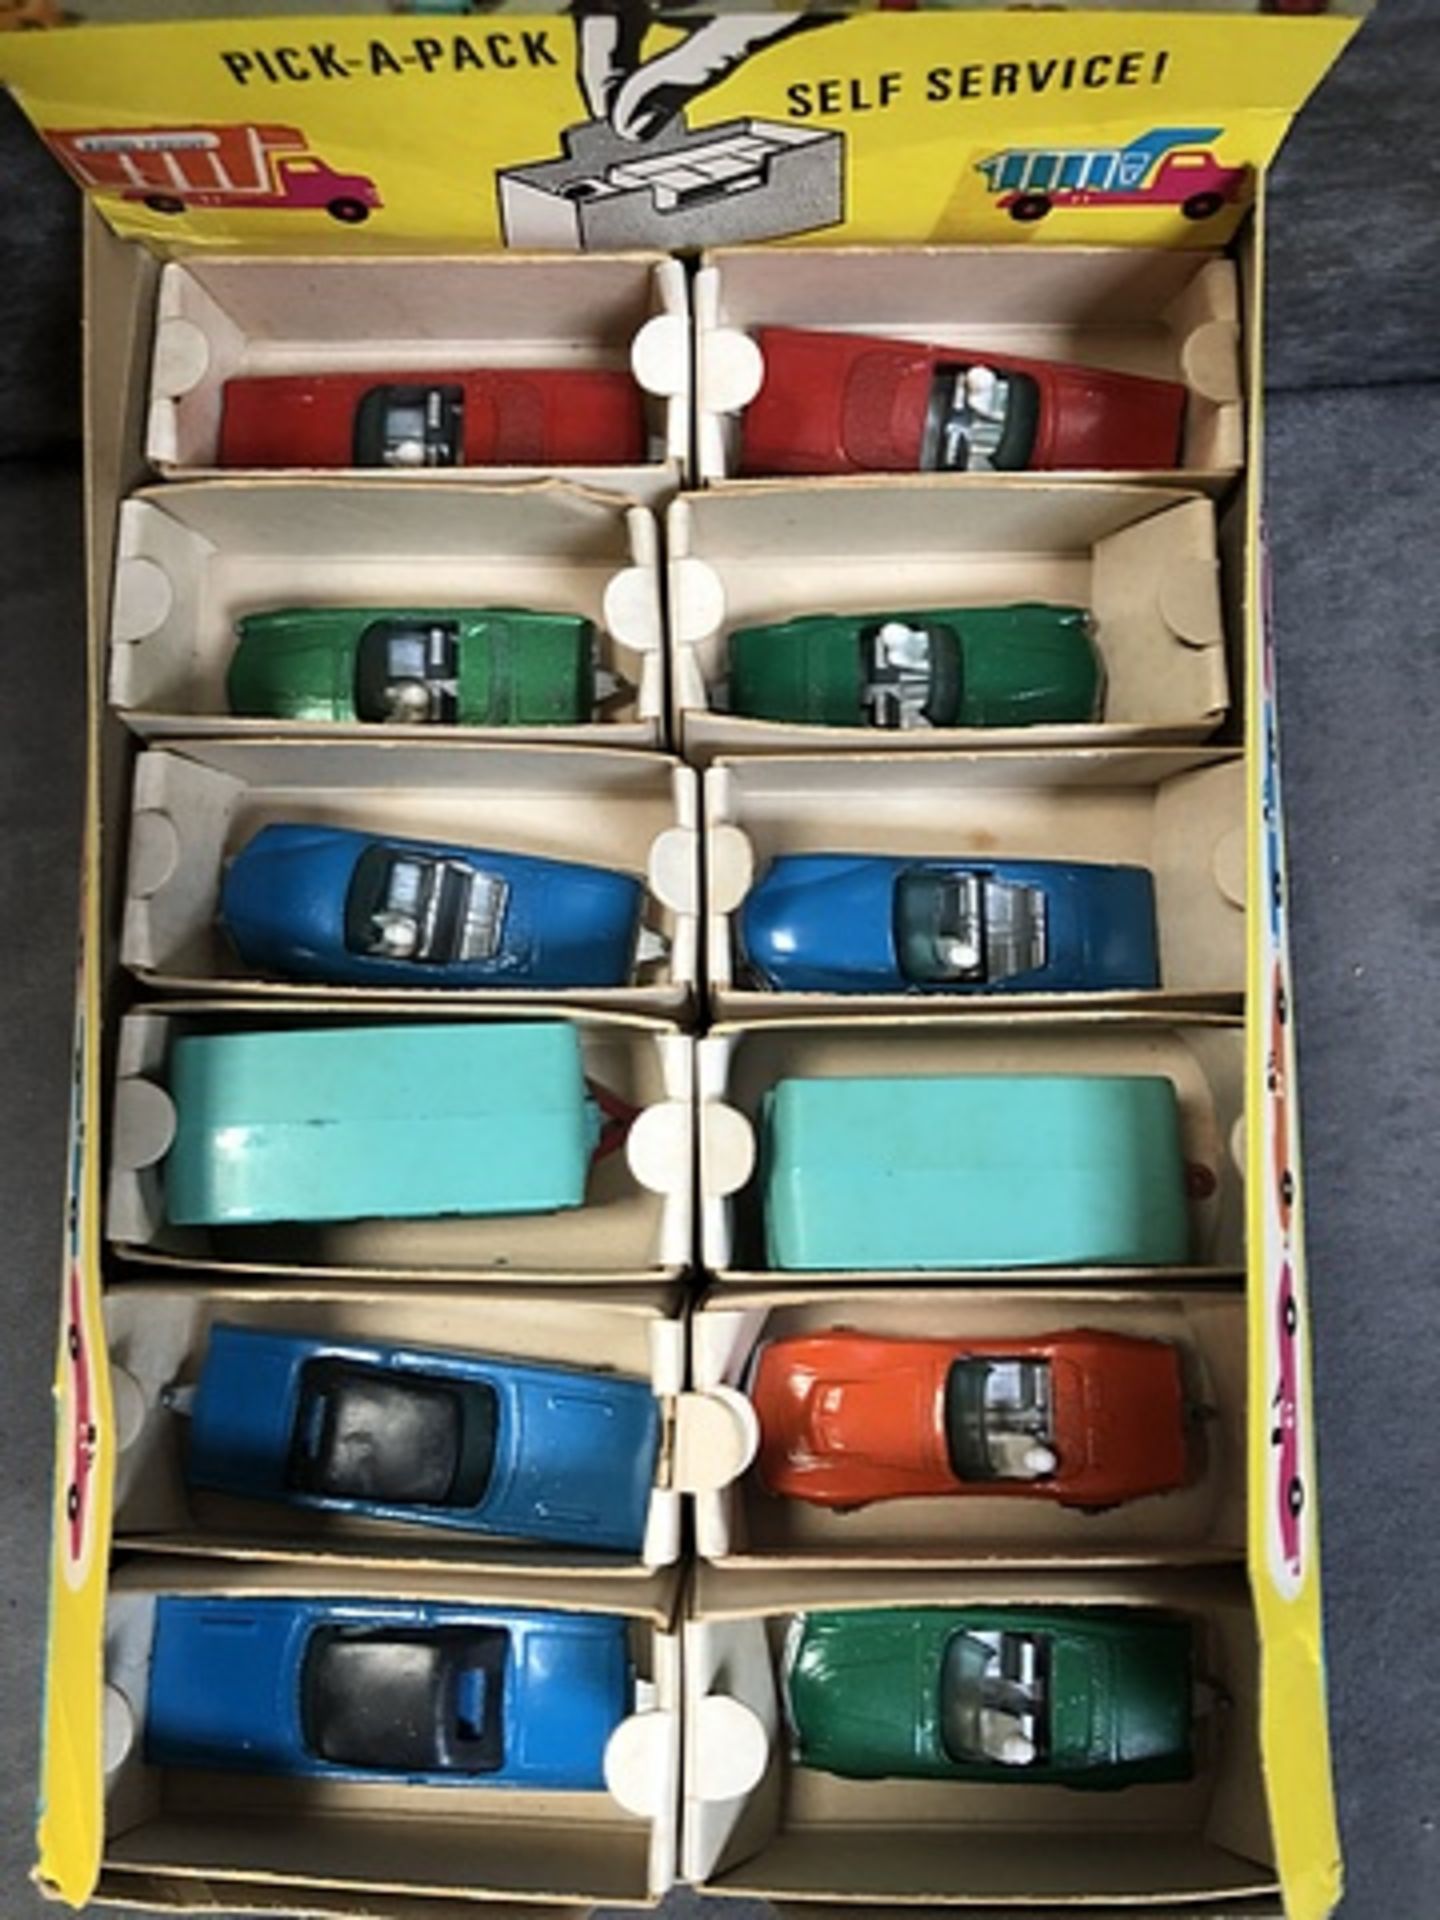 Lone Star Tuf-Tots Diecast Trade Box Containing 24 Cars With 6 Different Models